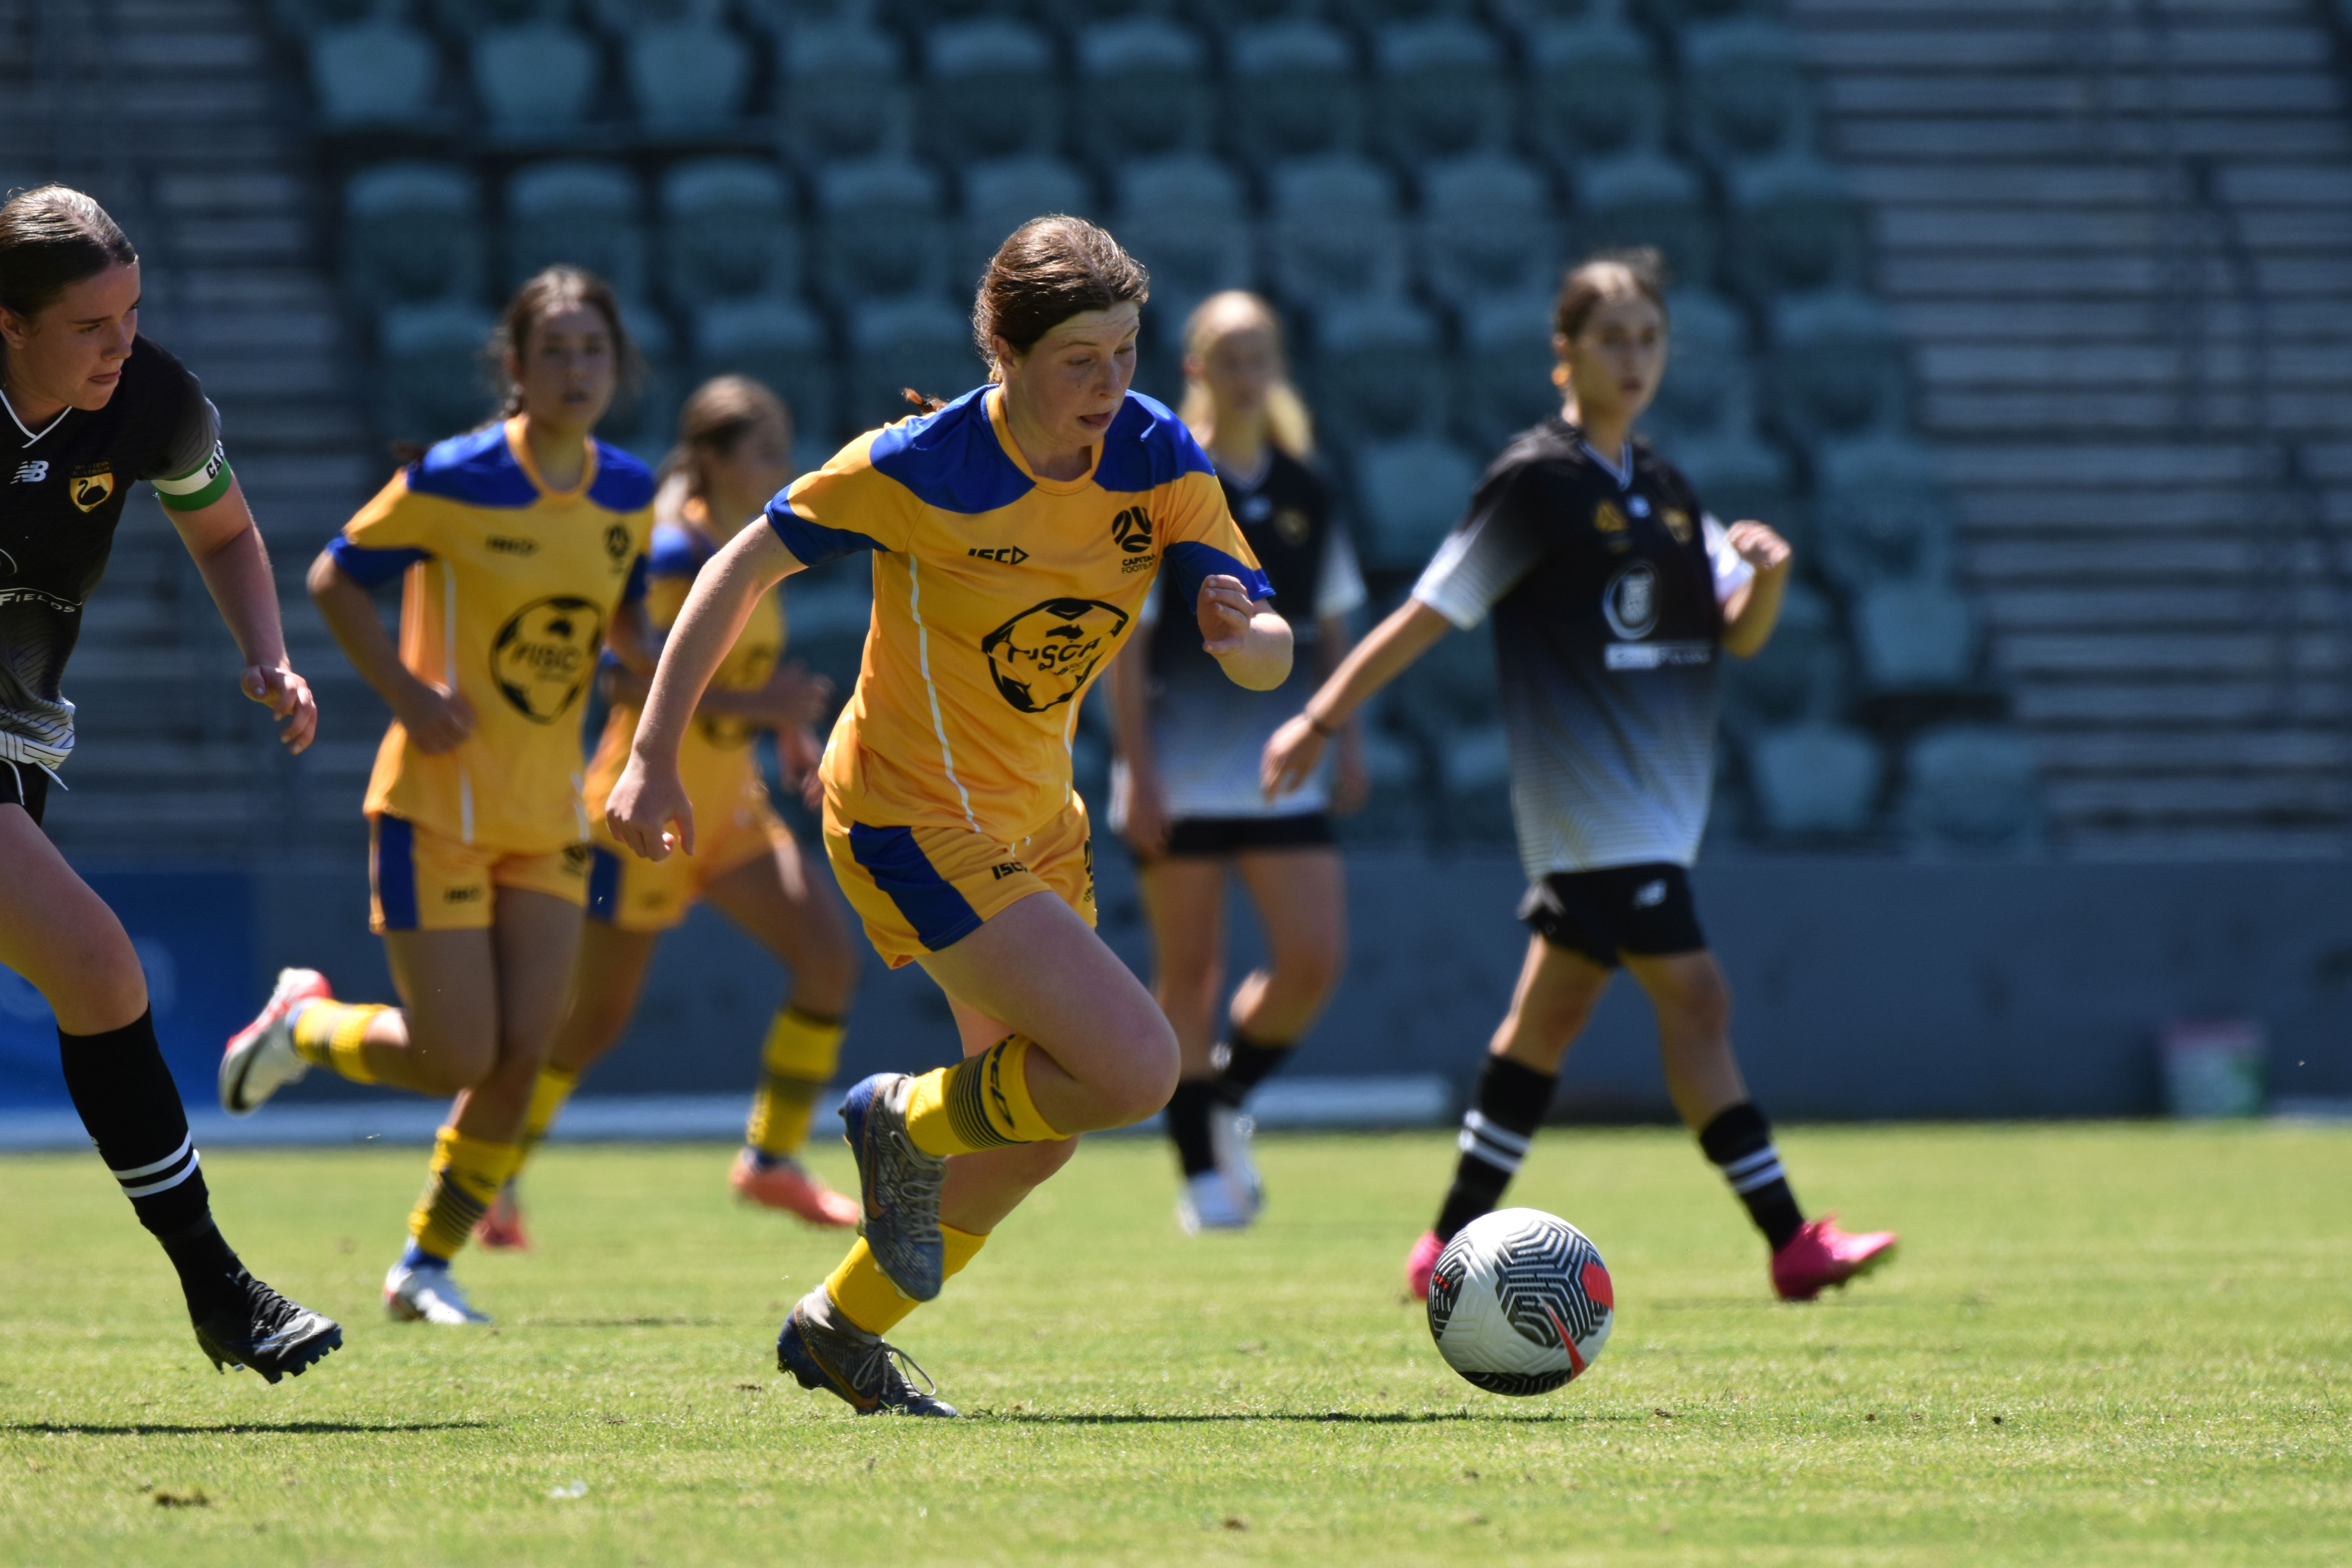 Capital Football on the charge against Western Australia in the Under 16s